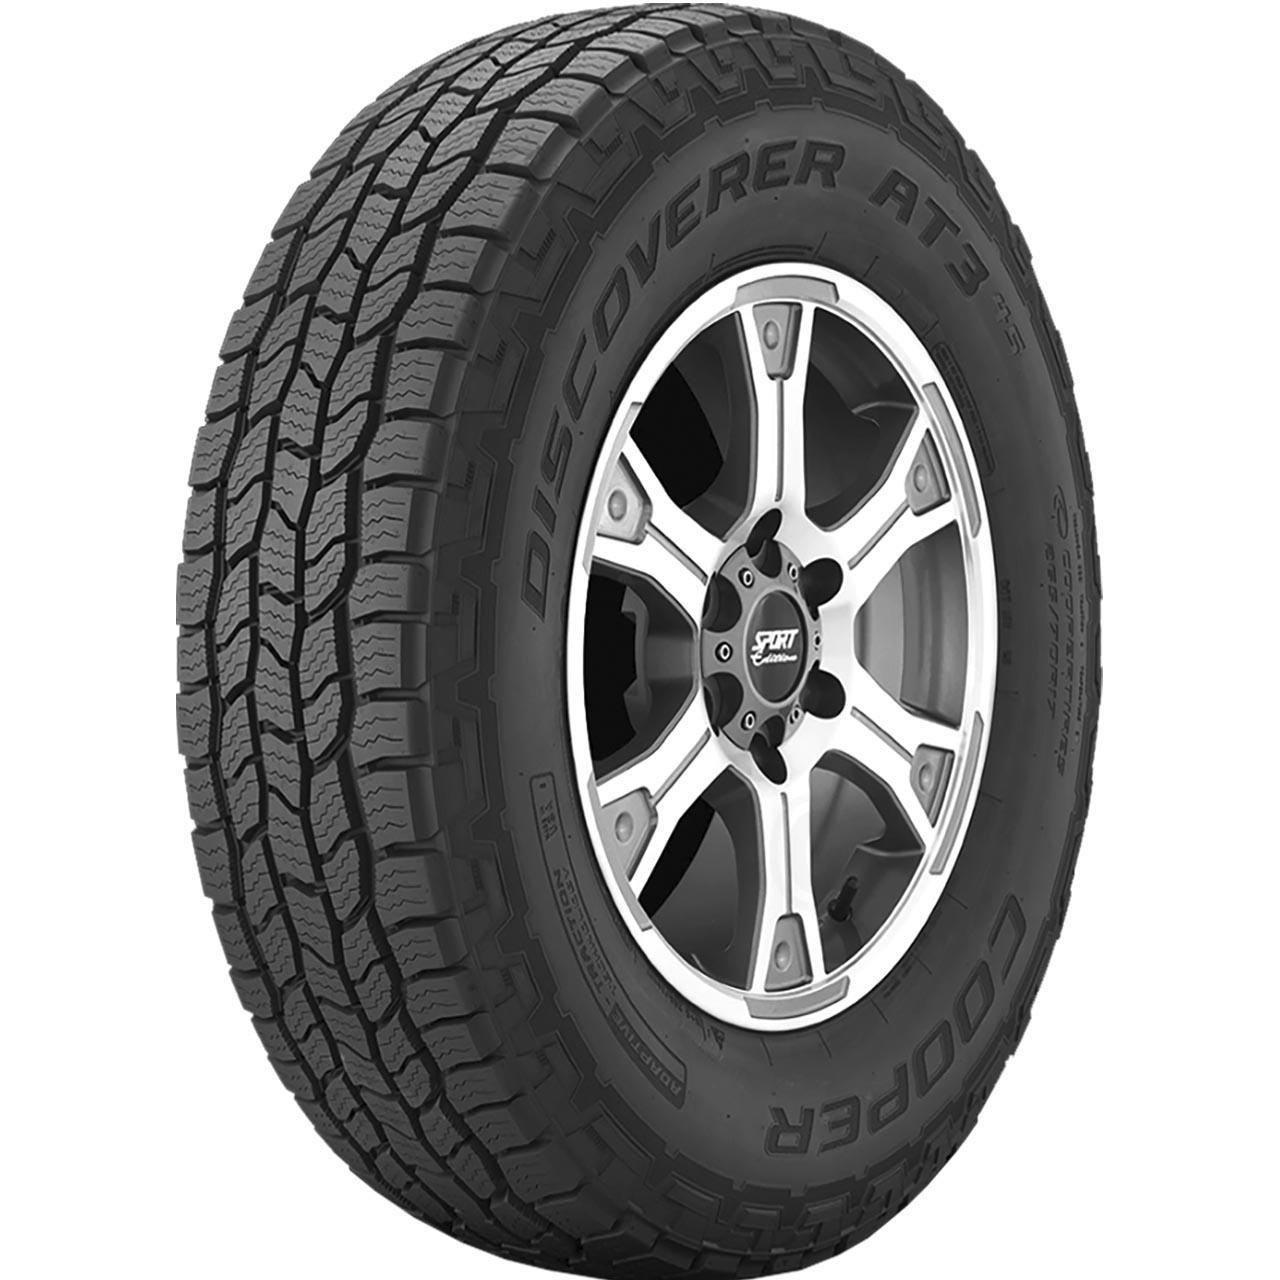 Cooper Discoverer AT3 4S 245/70R16 111T XL OWL